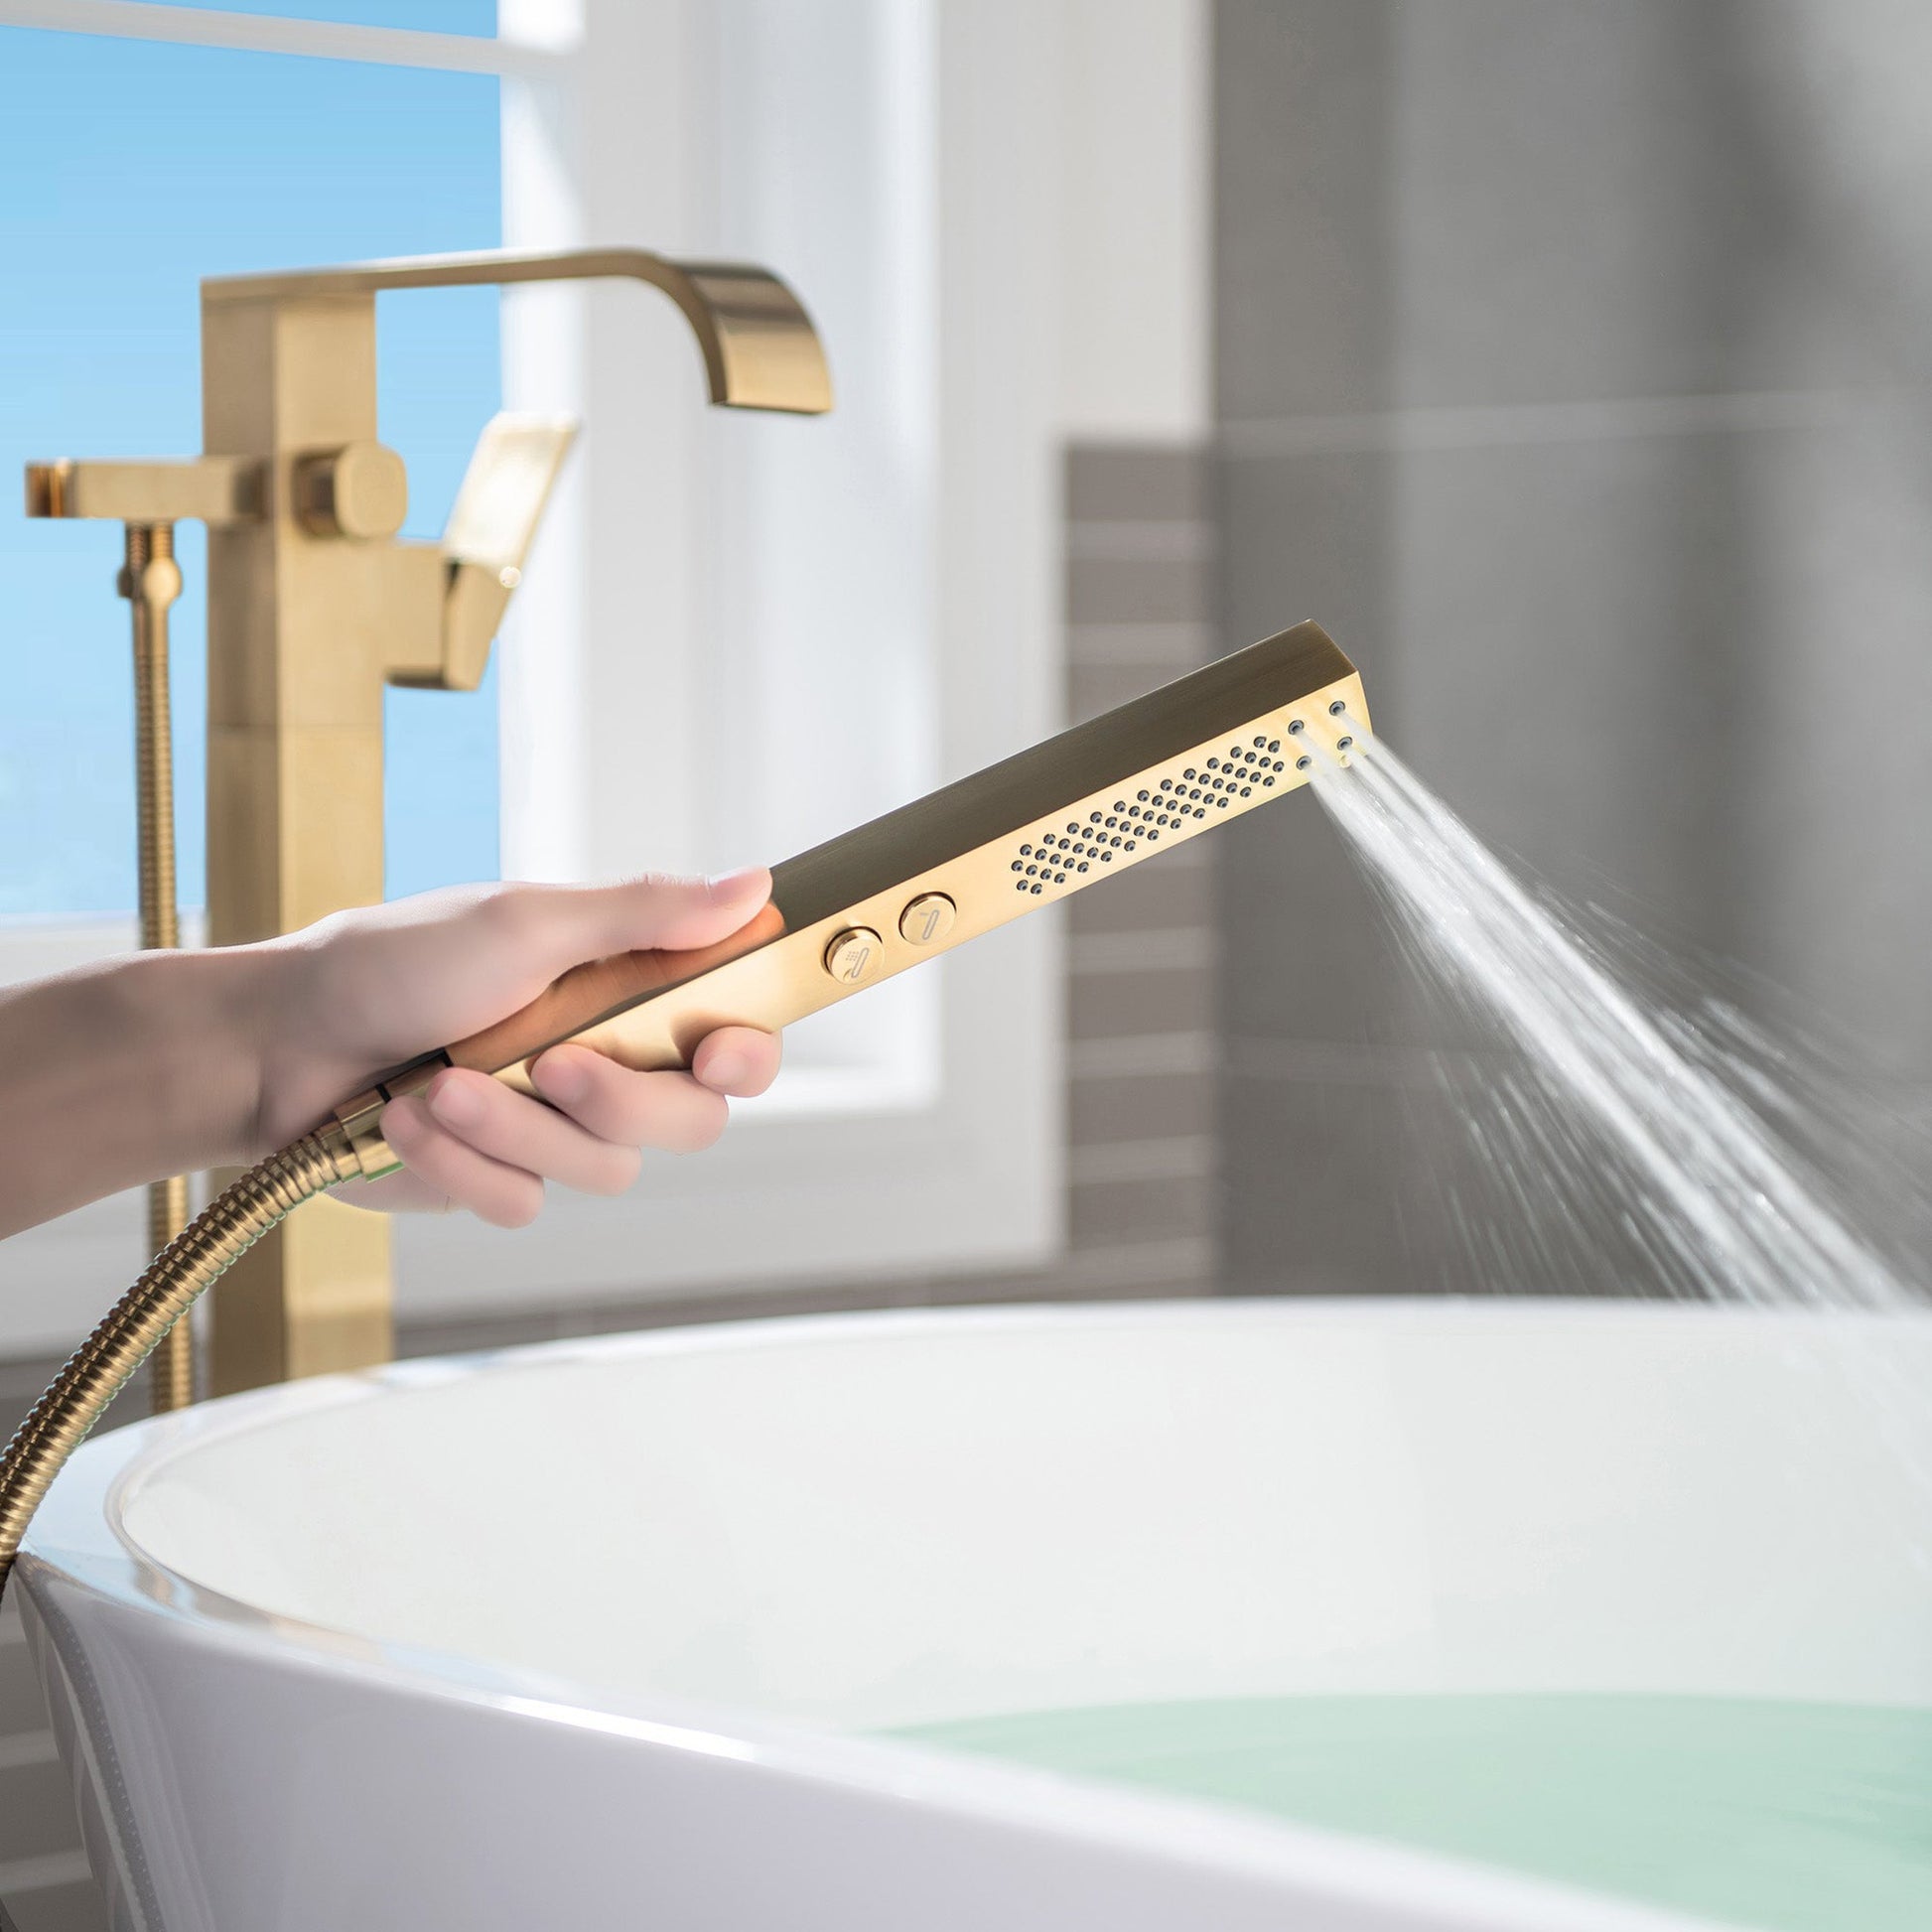 WoodBridge F0039BG Brushed Gold Contemporary Single Handle Floor Mount Freestanding Tub Filler Faucet With Square Hand Shower